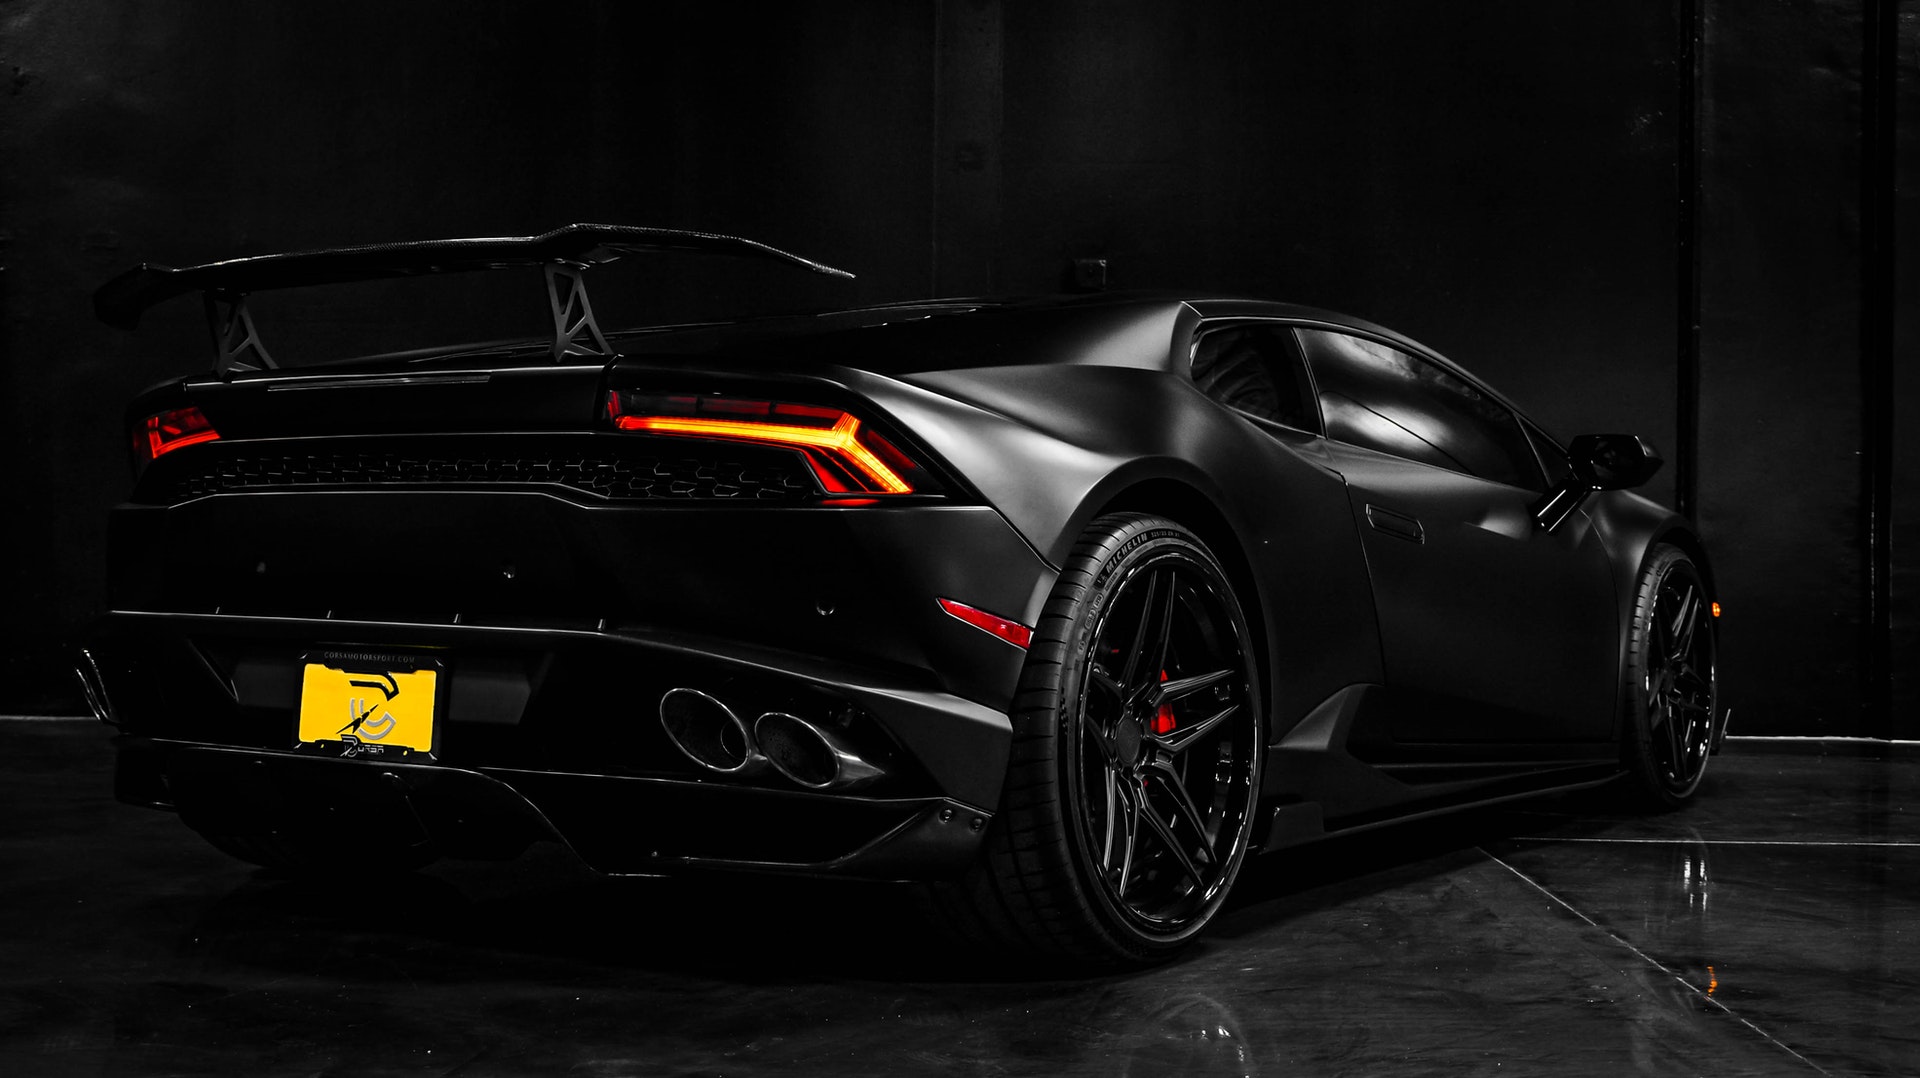 full view of a stylish black sportscar from the back